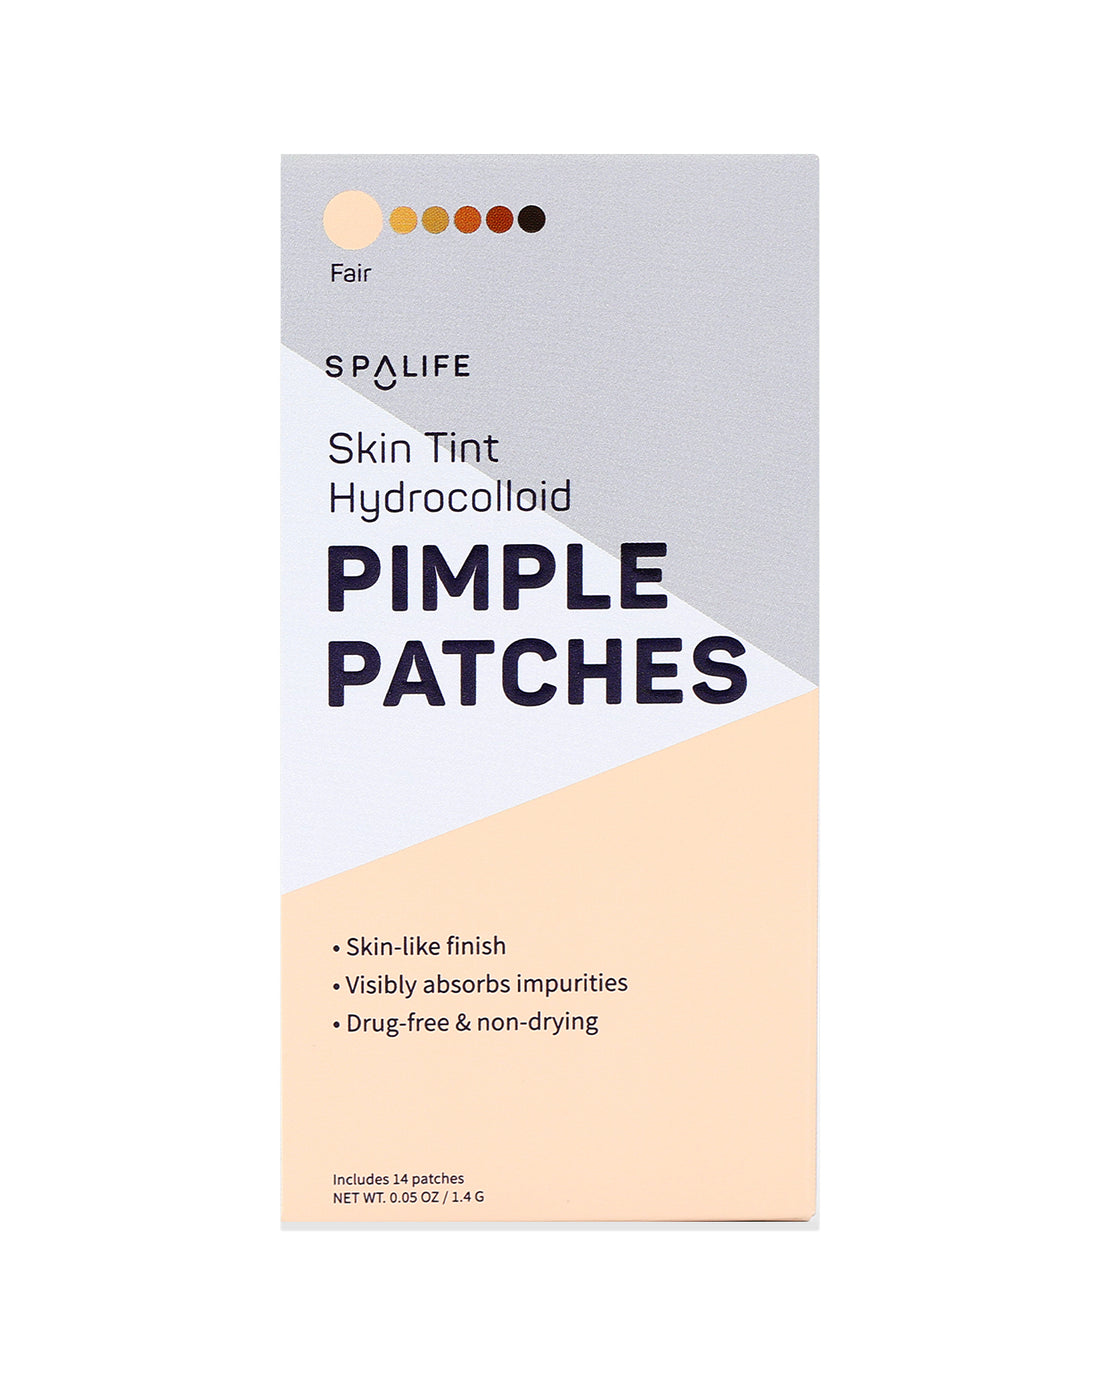 Skin_tint_pimple_patches_packe-256